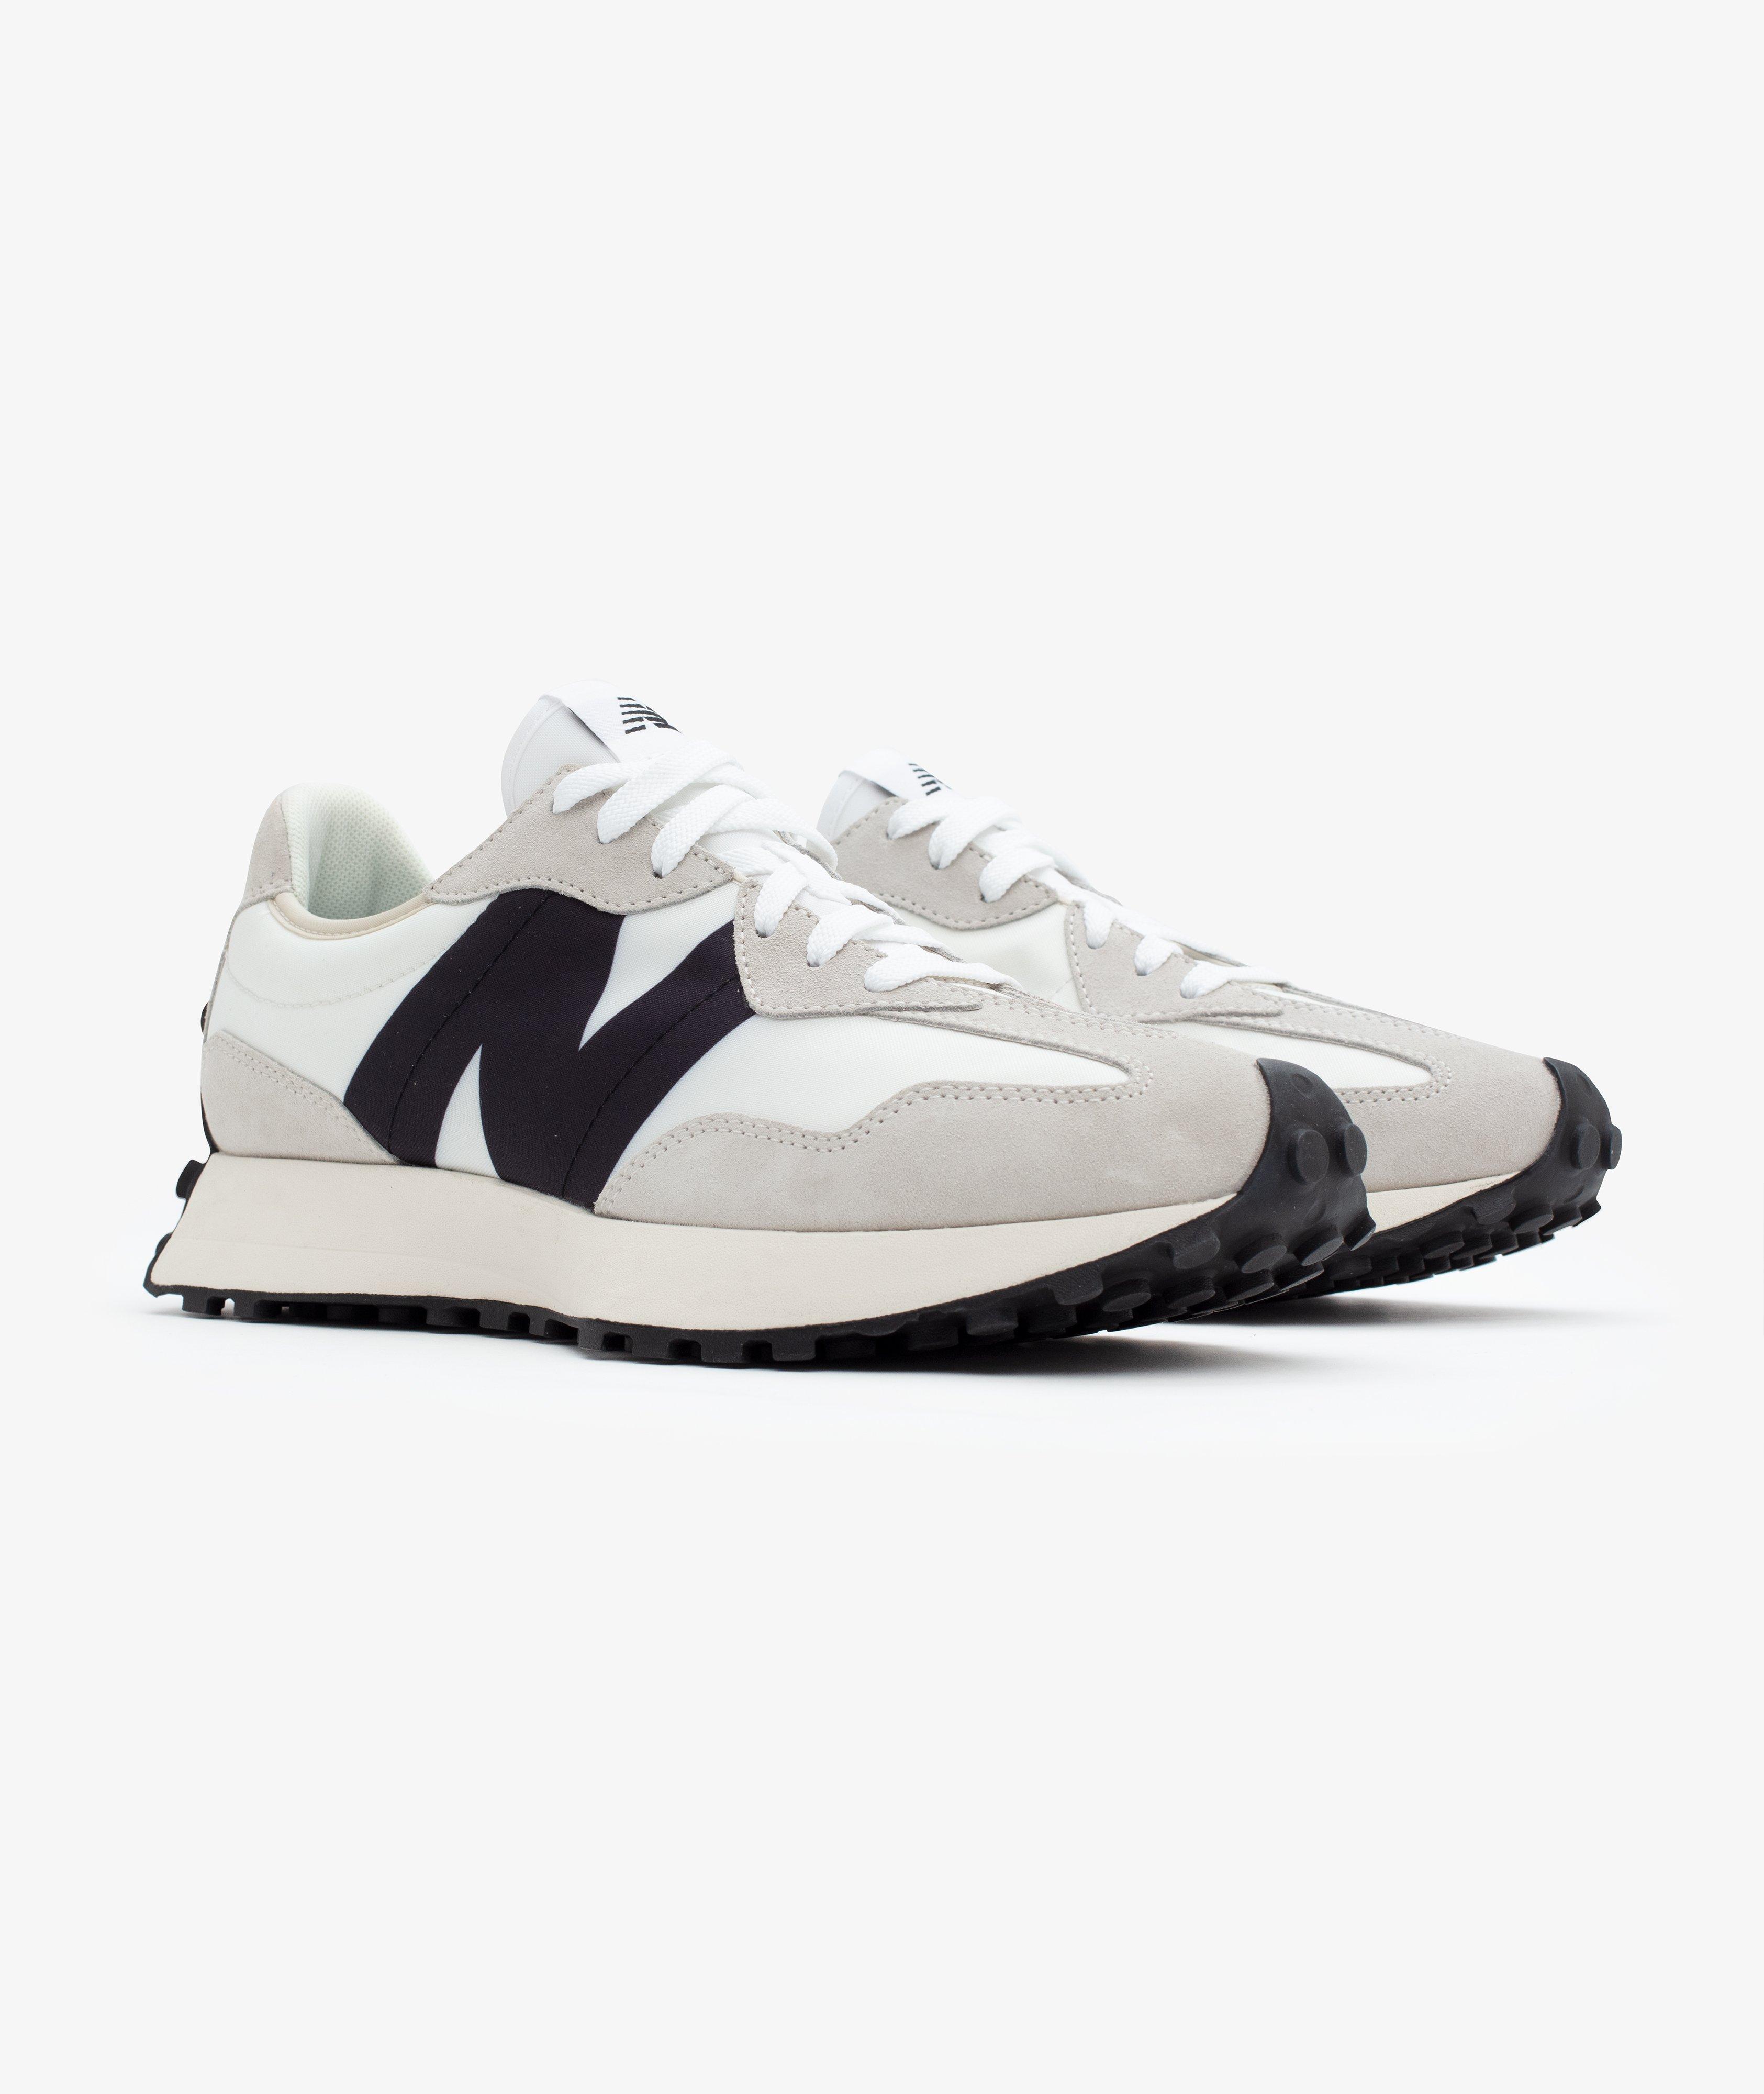 New Balance 327 Suede, Nylon, and Mesh Sneakers